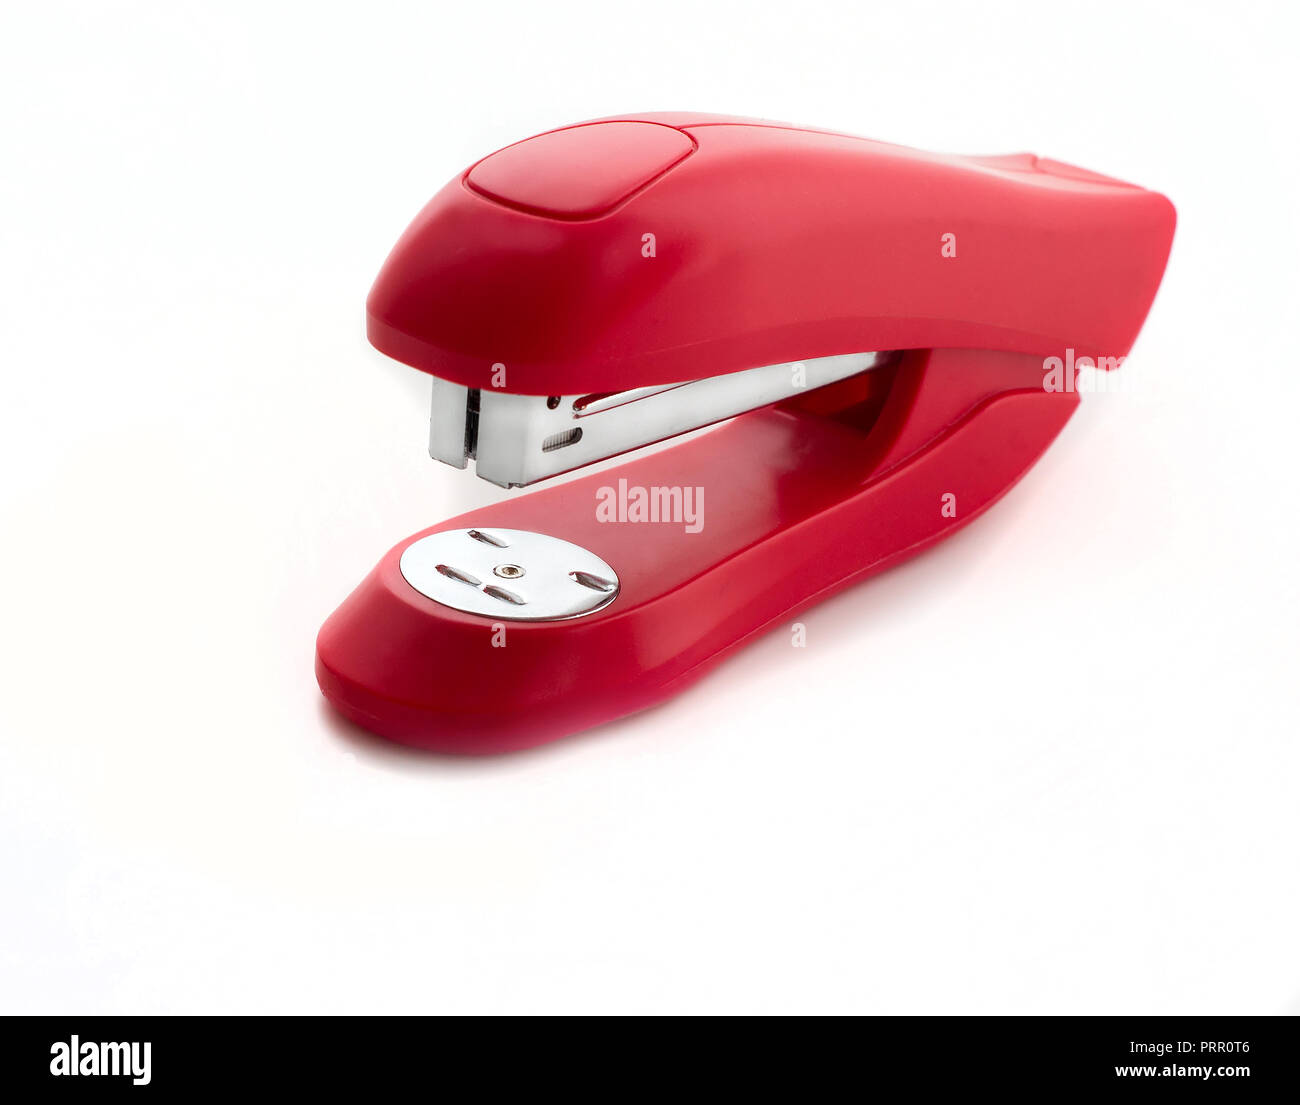 Red stapler close up isolated on white background Stock Photo